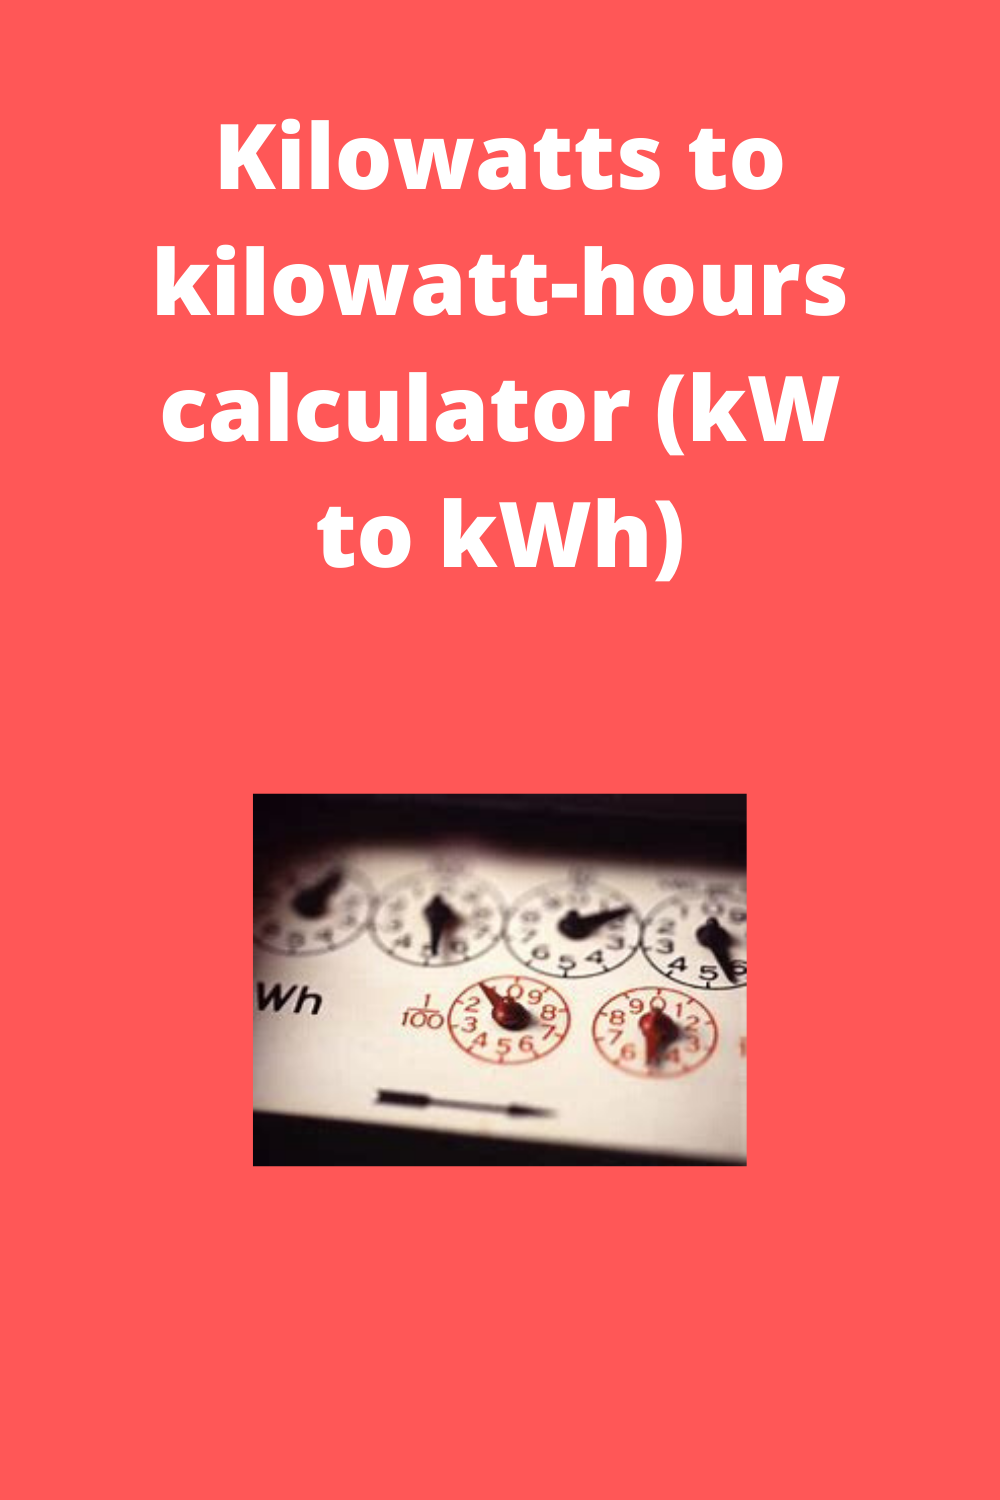 kwh to kw conversion